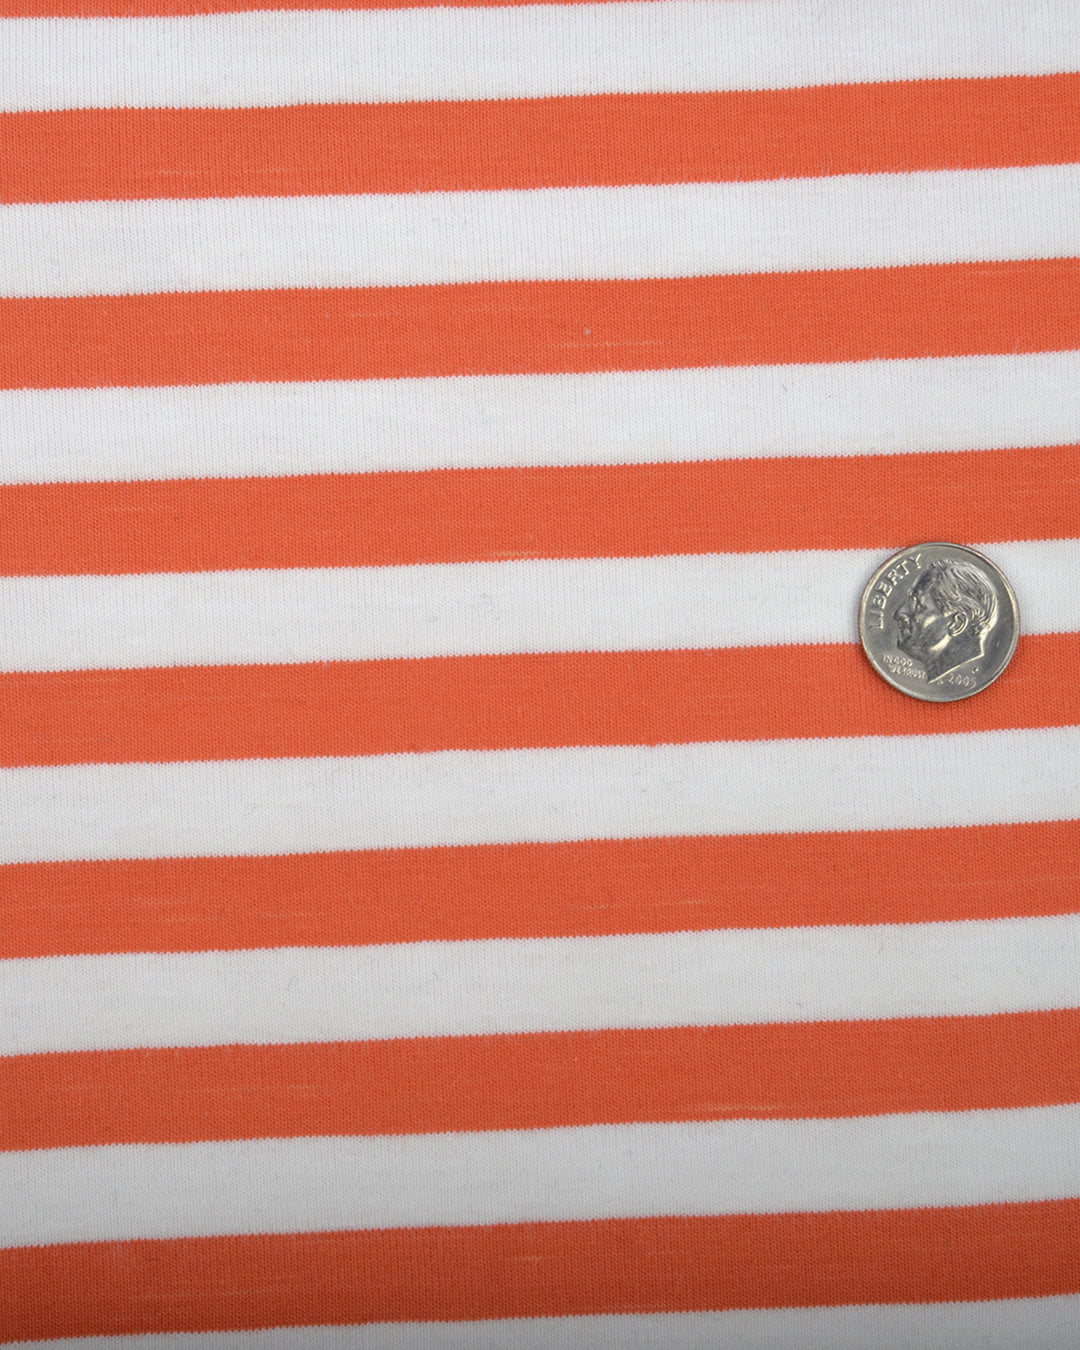 Close up of the custom oxford polo shirt for men by Luxire in orange and white stripes